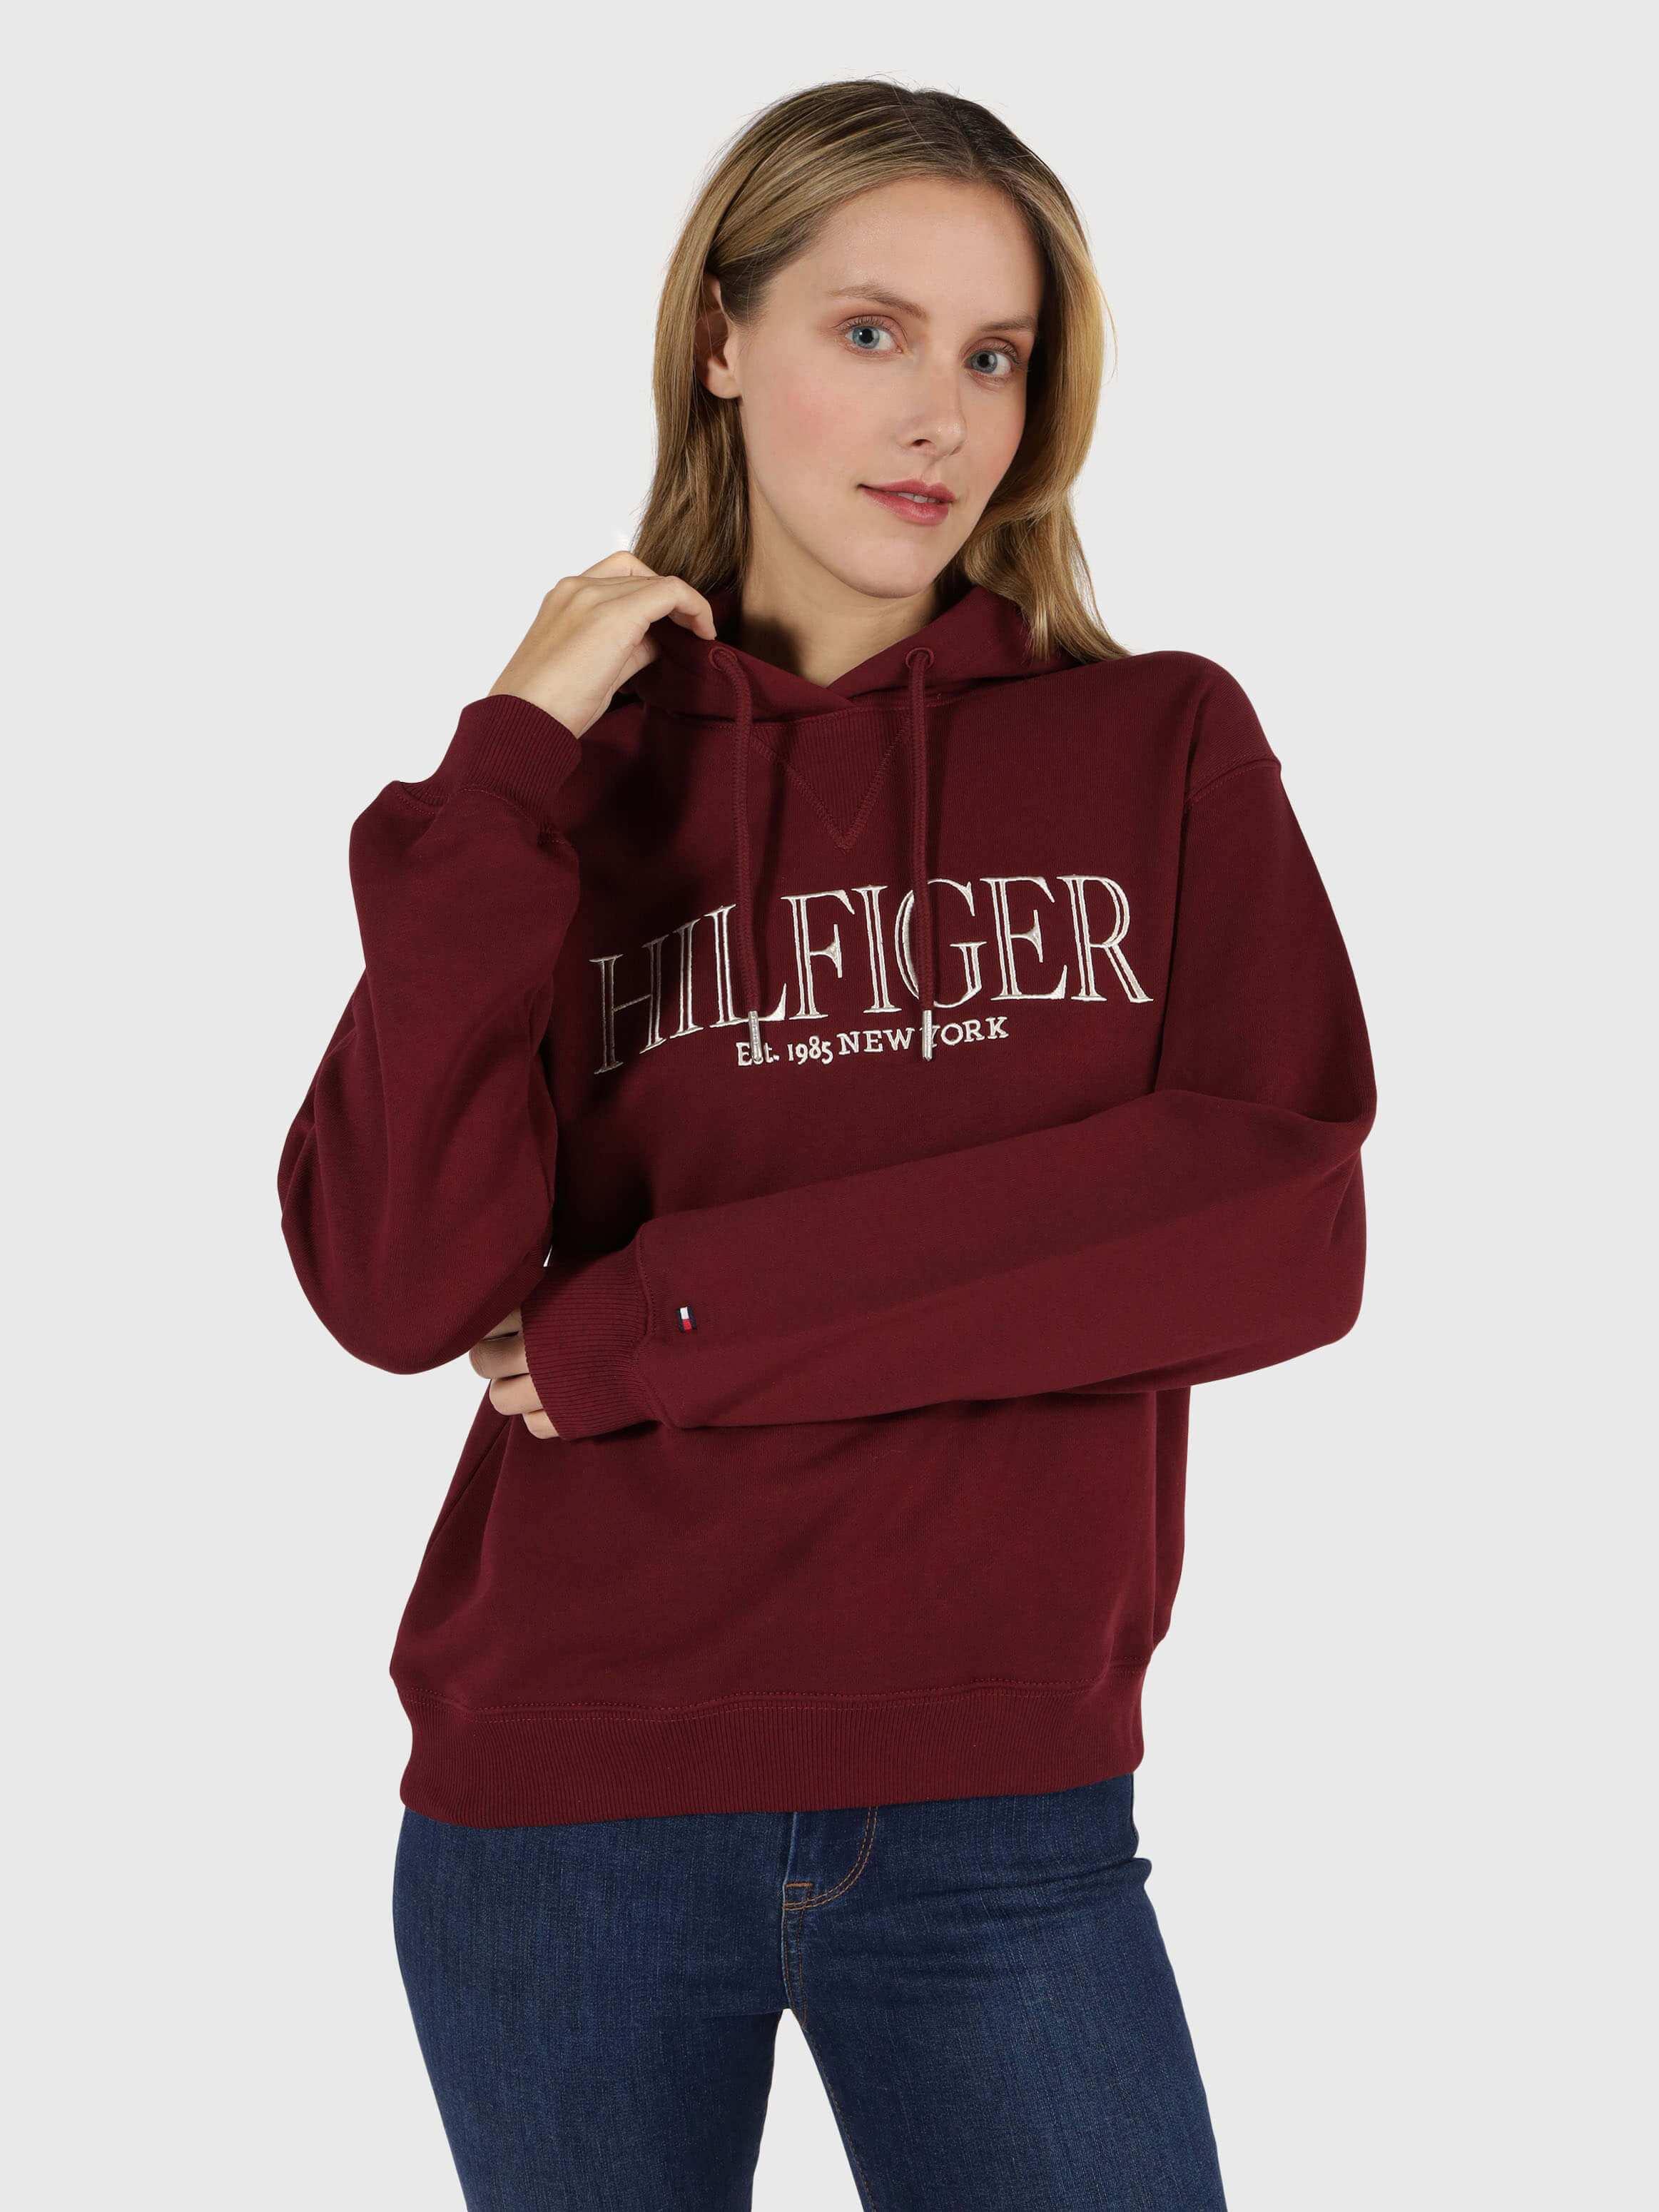 Ripley - SWEATER O HOODIE CON CAPUCHA TOMMY HILFIGER PARA MUJER - BLANCO